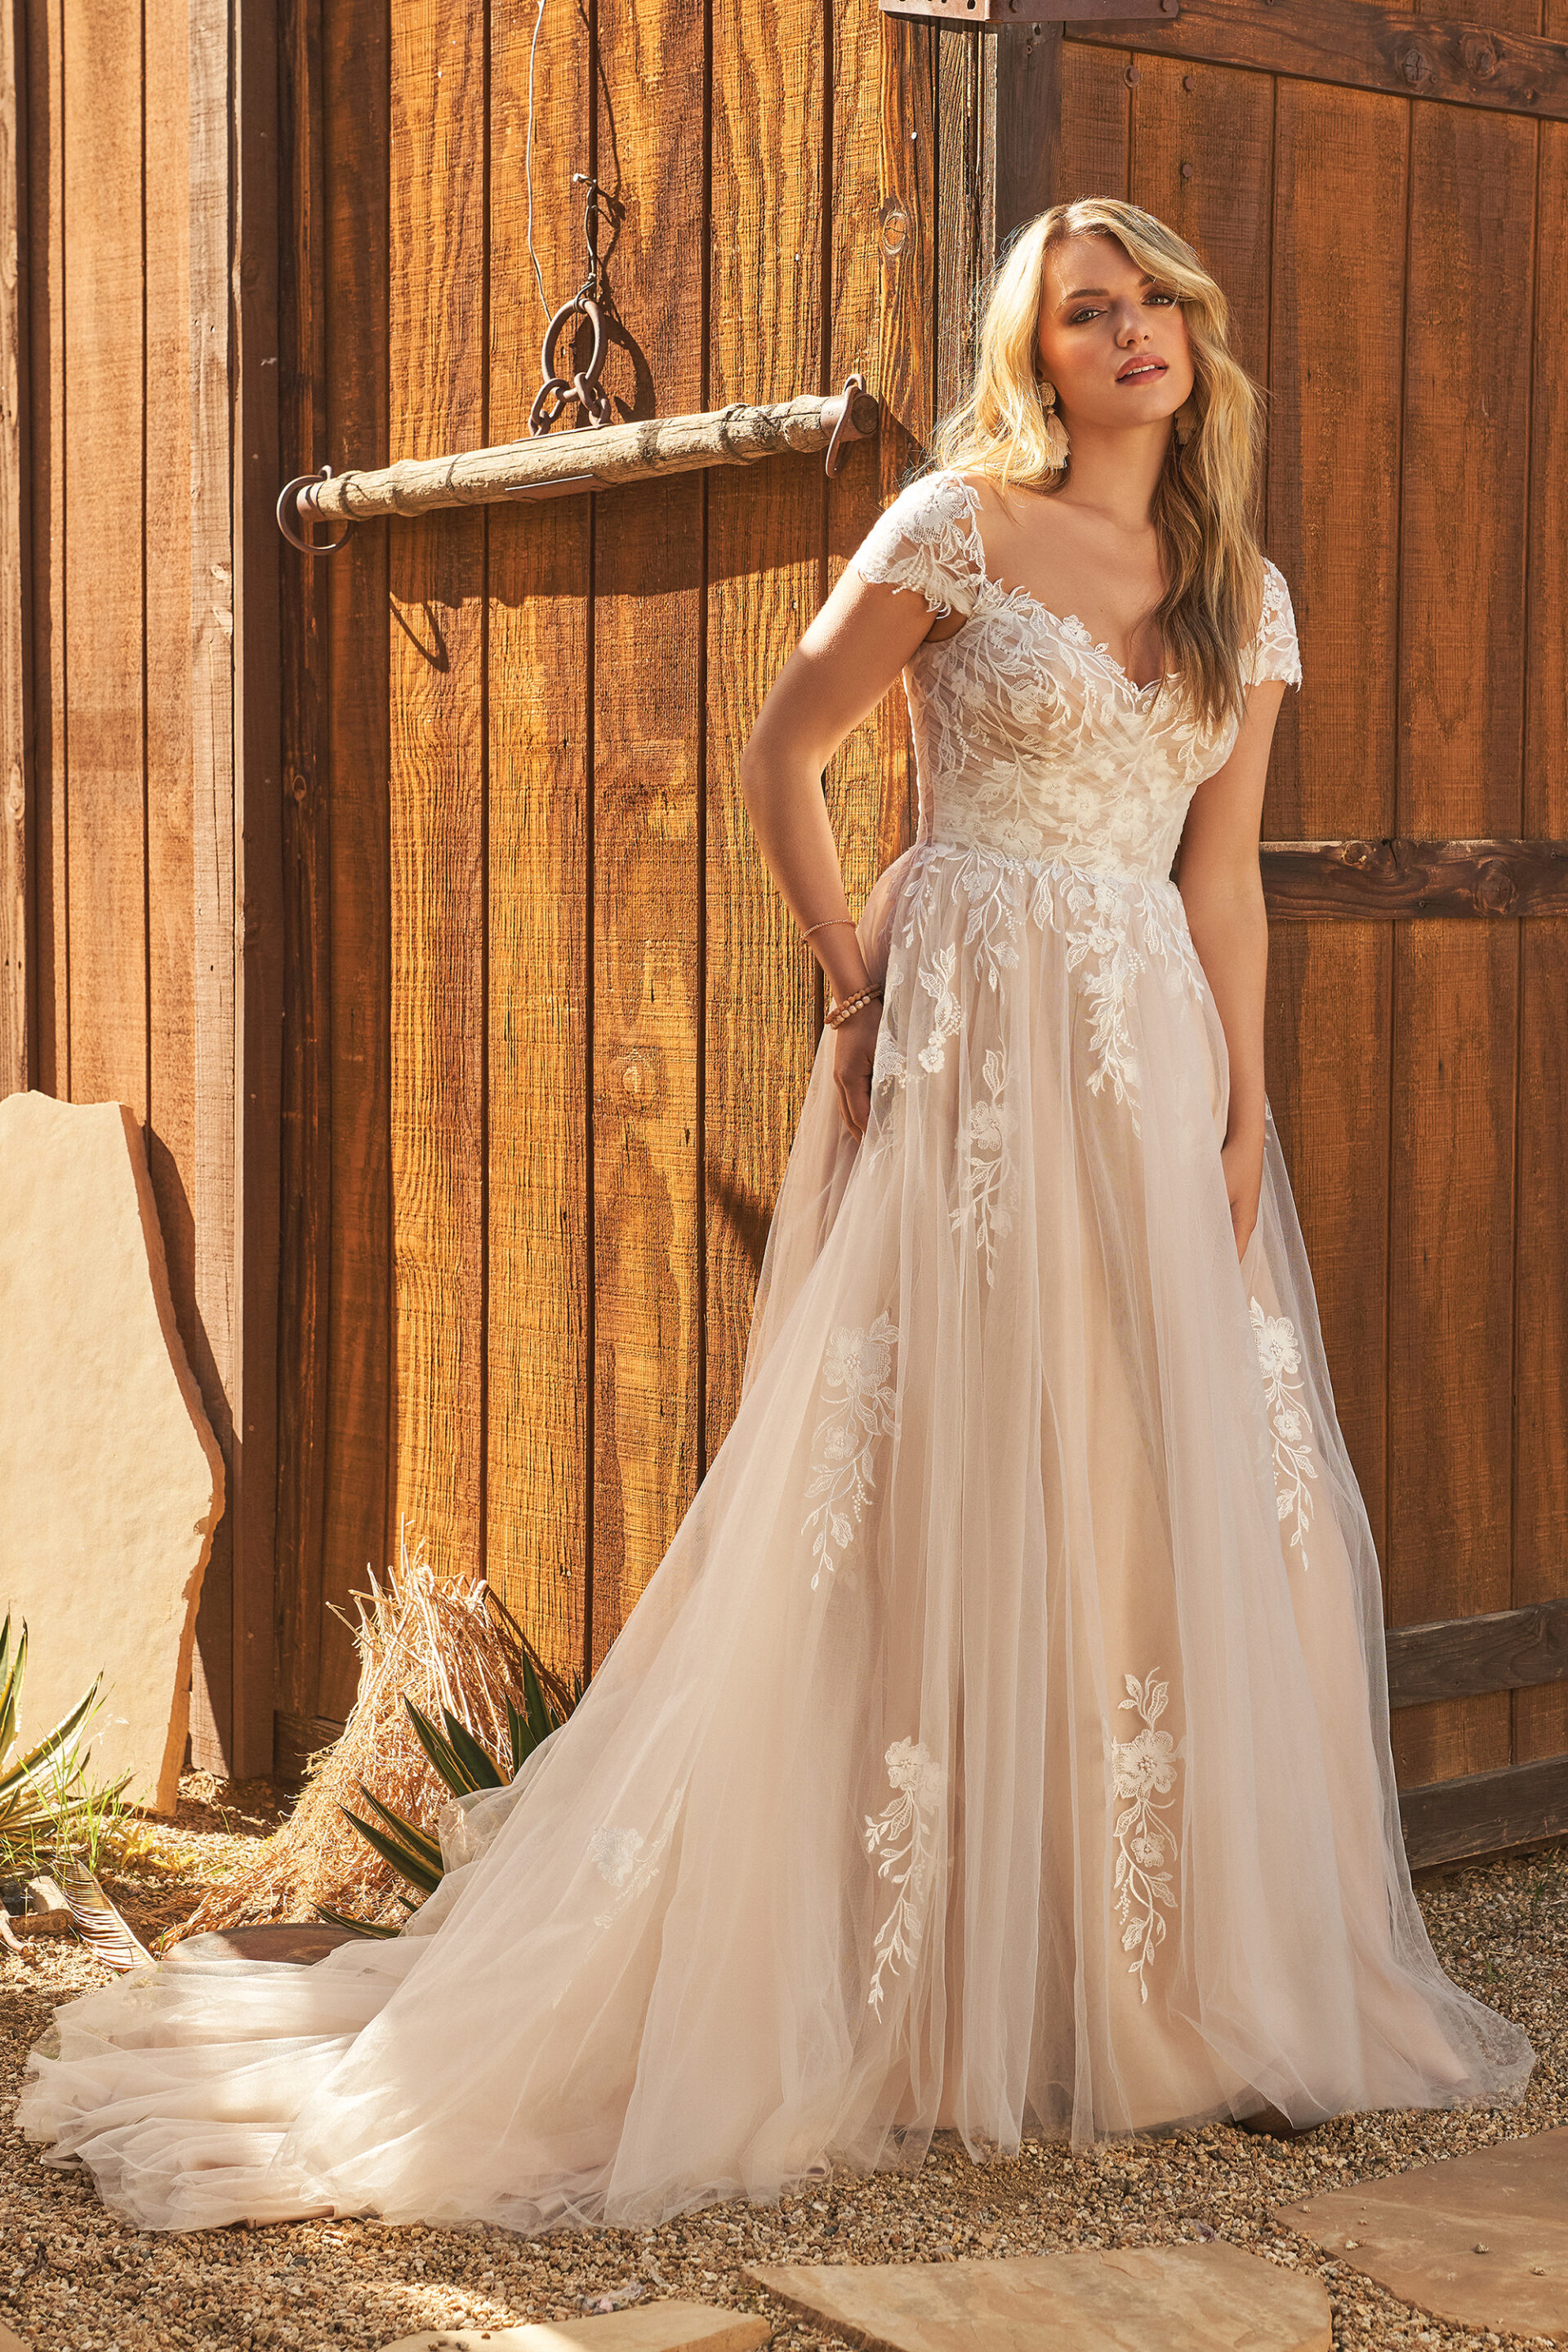 Tulle A-Line Bridal Gown With Cap Sleeves by Justin Alexander